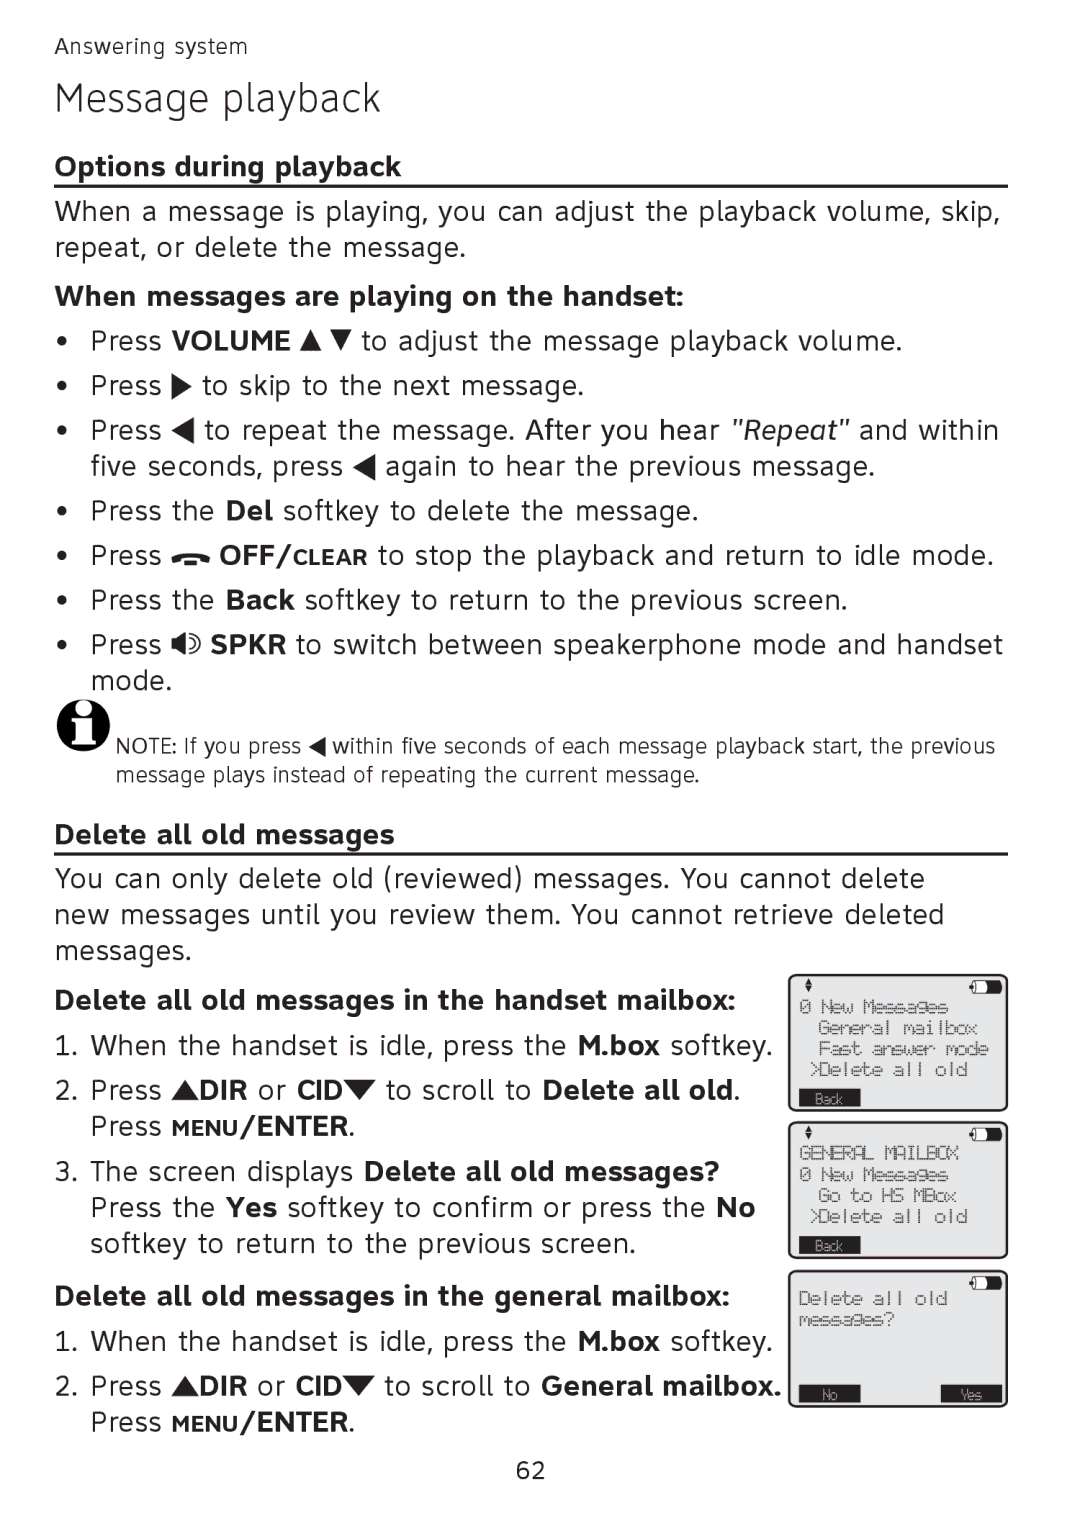 AT&T SB67108 user manual Options during playback, When messages are playing on the handset, Delete all old messages 